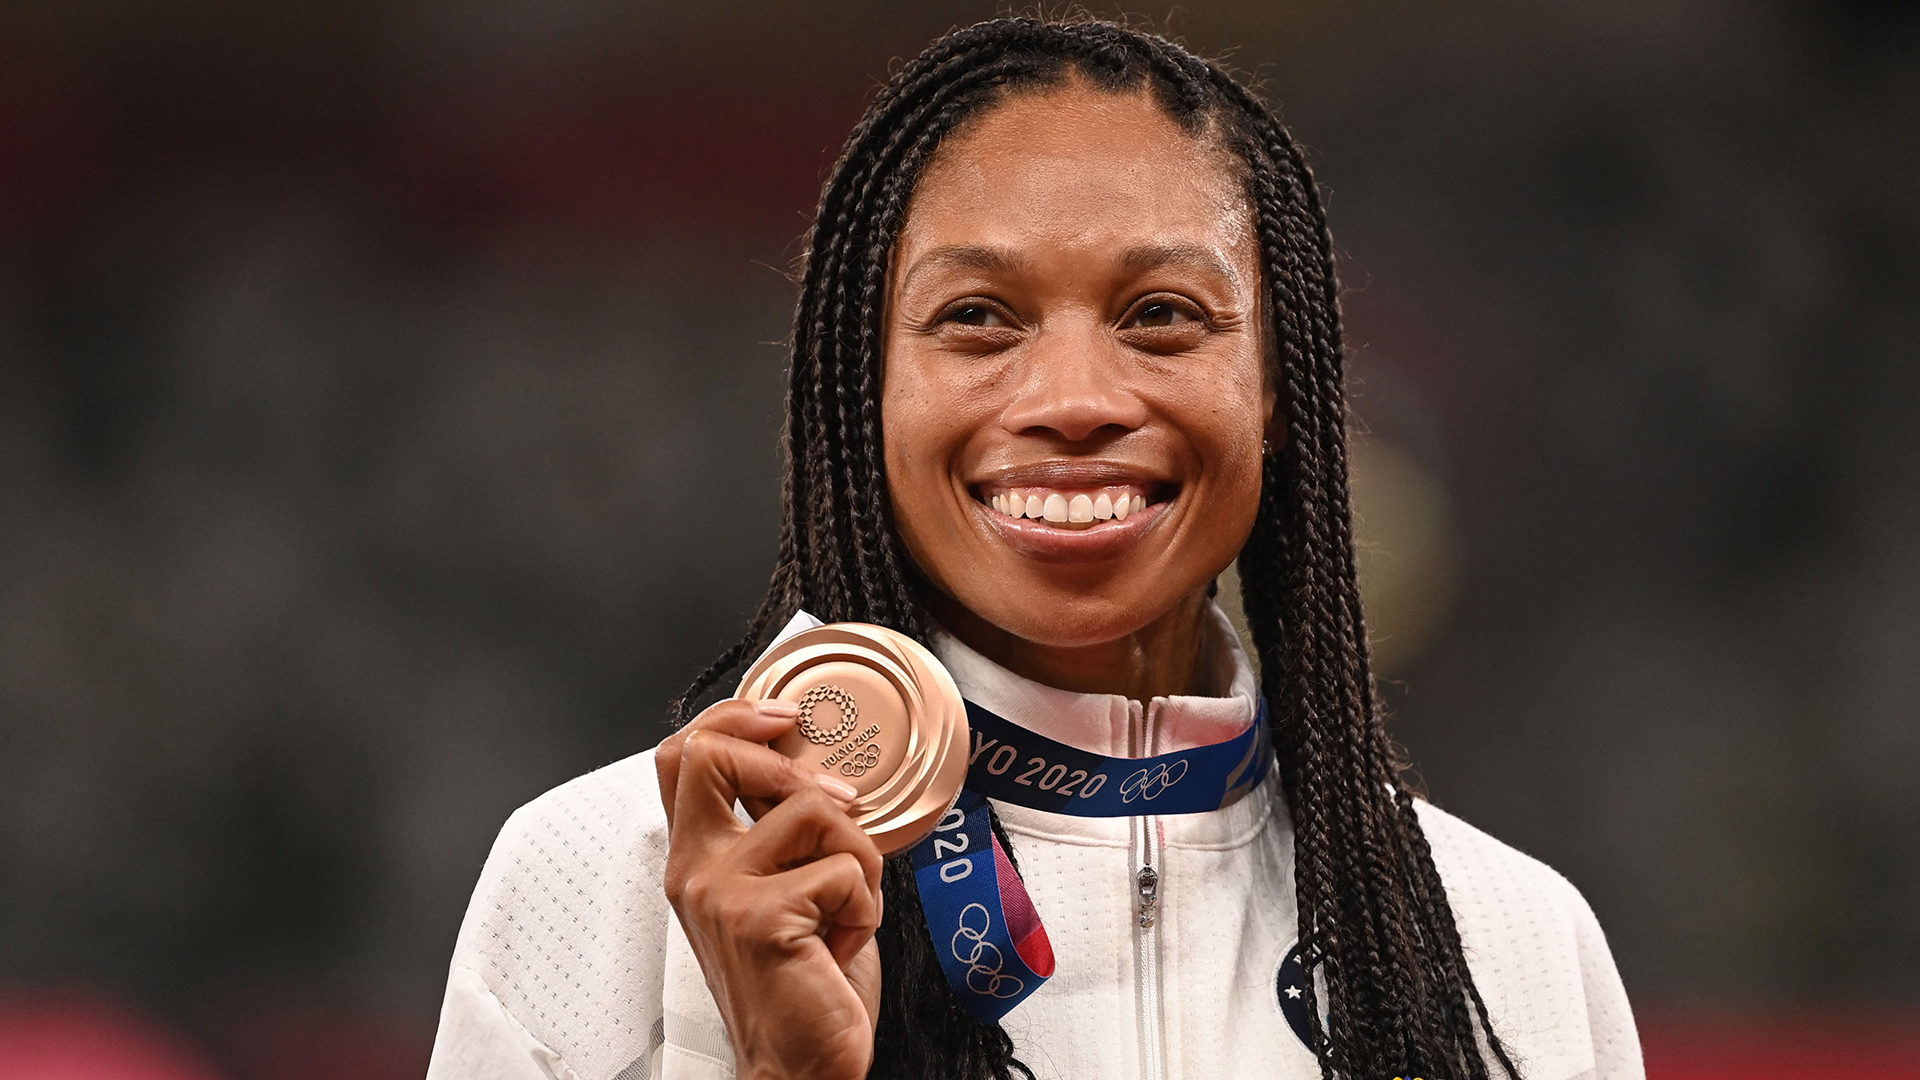 Allyson Felix's Net Worth Is Based On More Than Medals And Endorsements